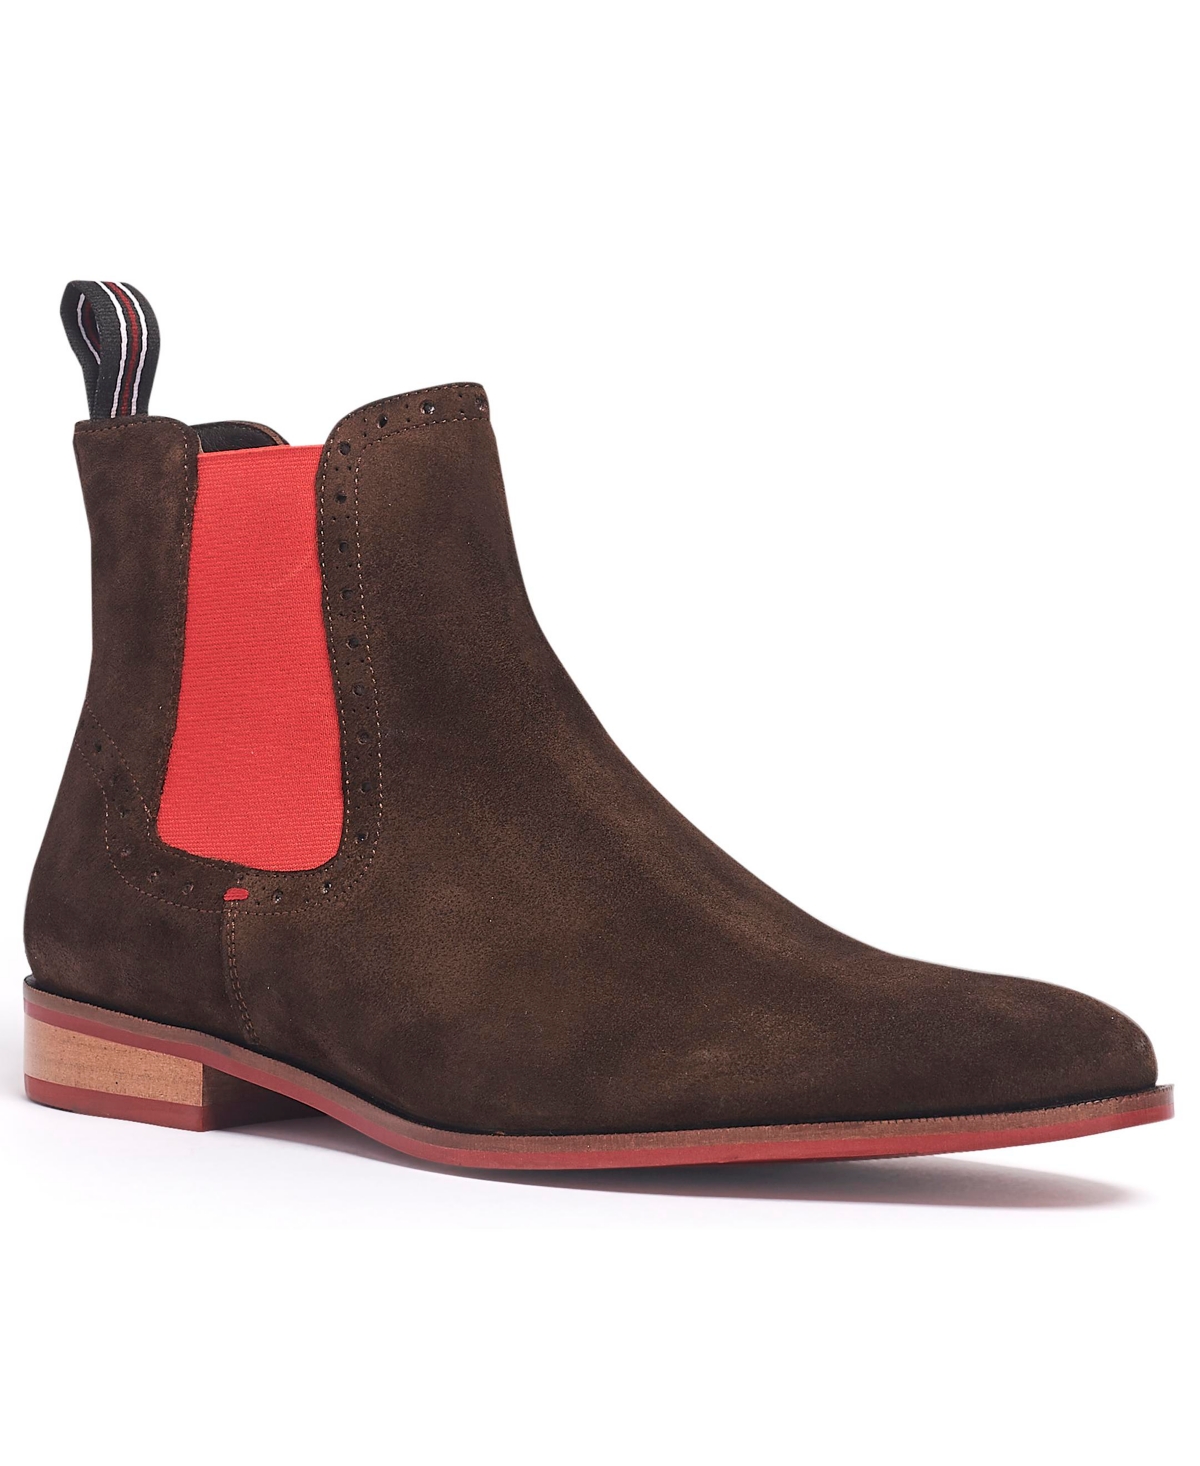 Men's Mantra Chelsea Boots - Chocolate Brown